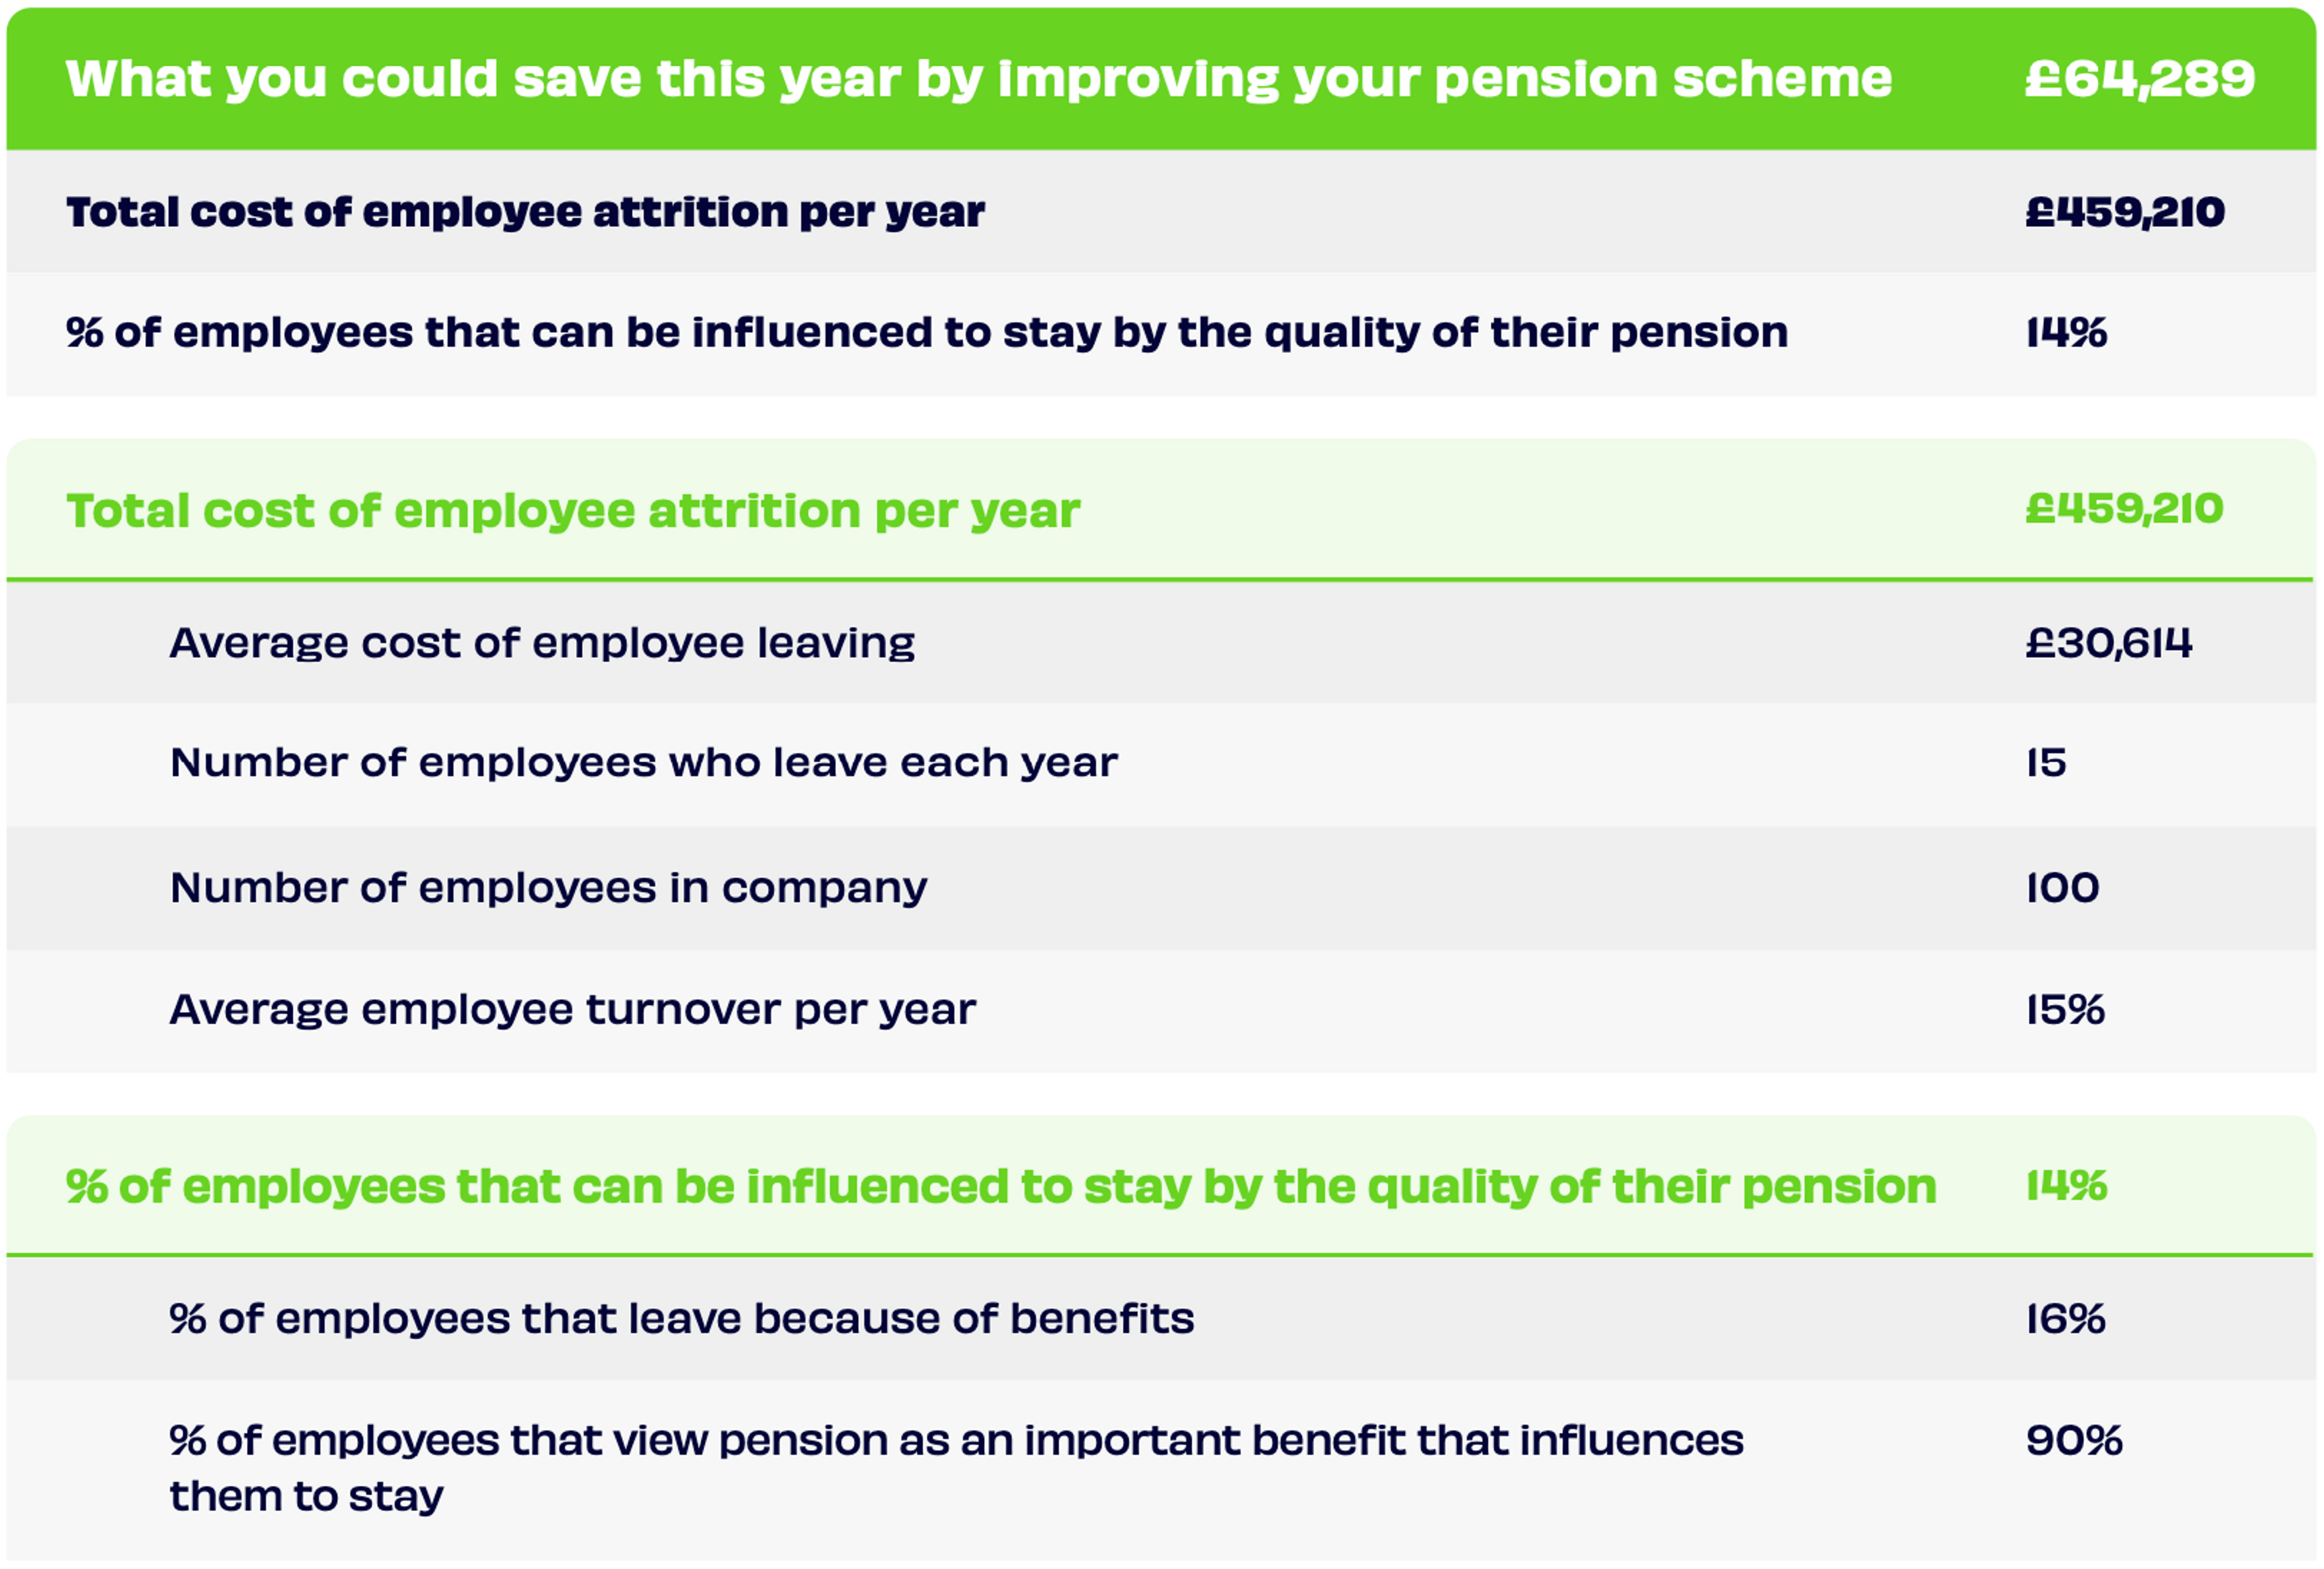 Table showing potential cost savings by improving company pension scheme